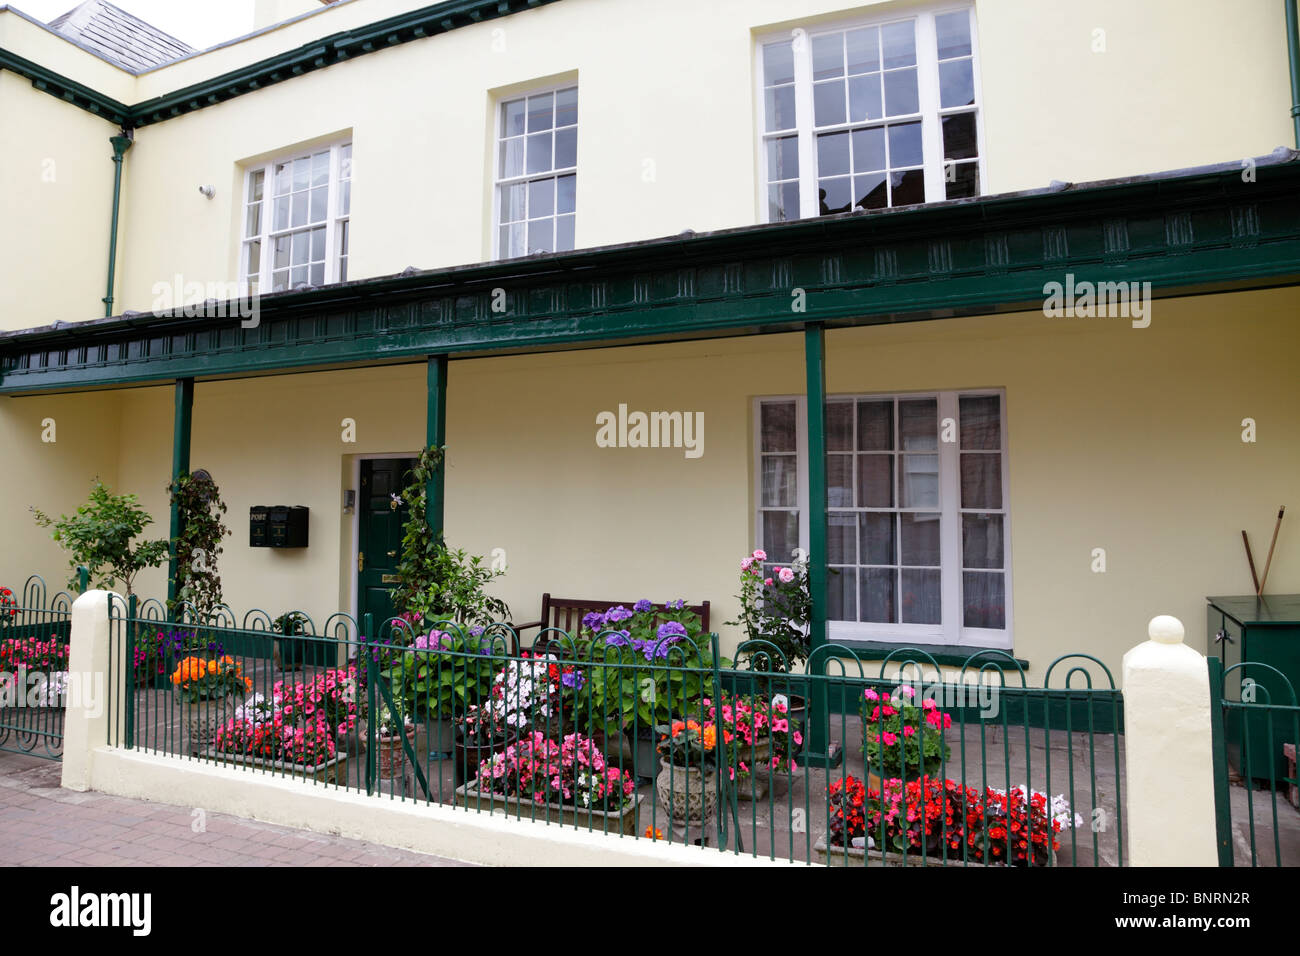 16th c town house originally an inn around 1756 before becoming the Judge's Lodging in 1835 St James Square Monmouth Wales UK Stock Photo